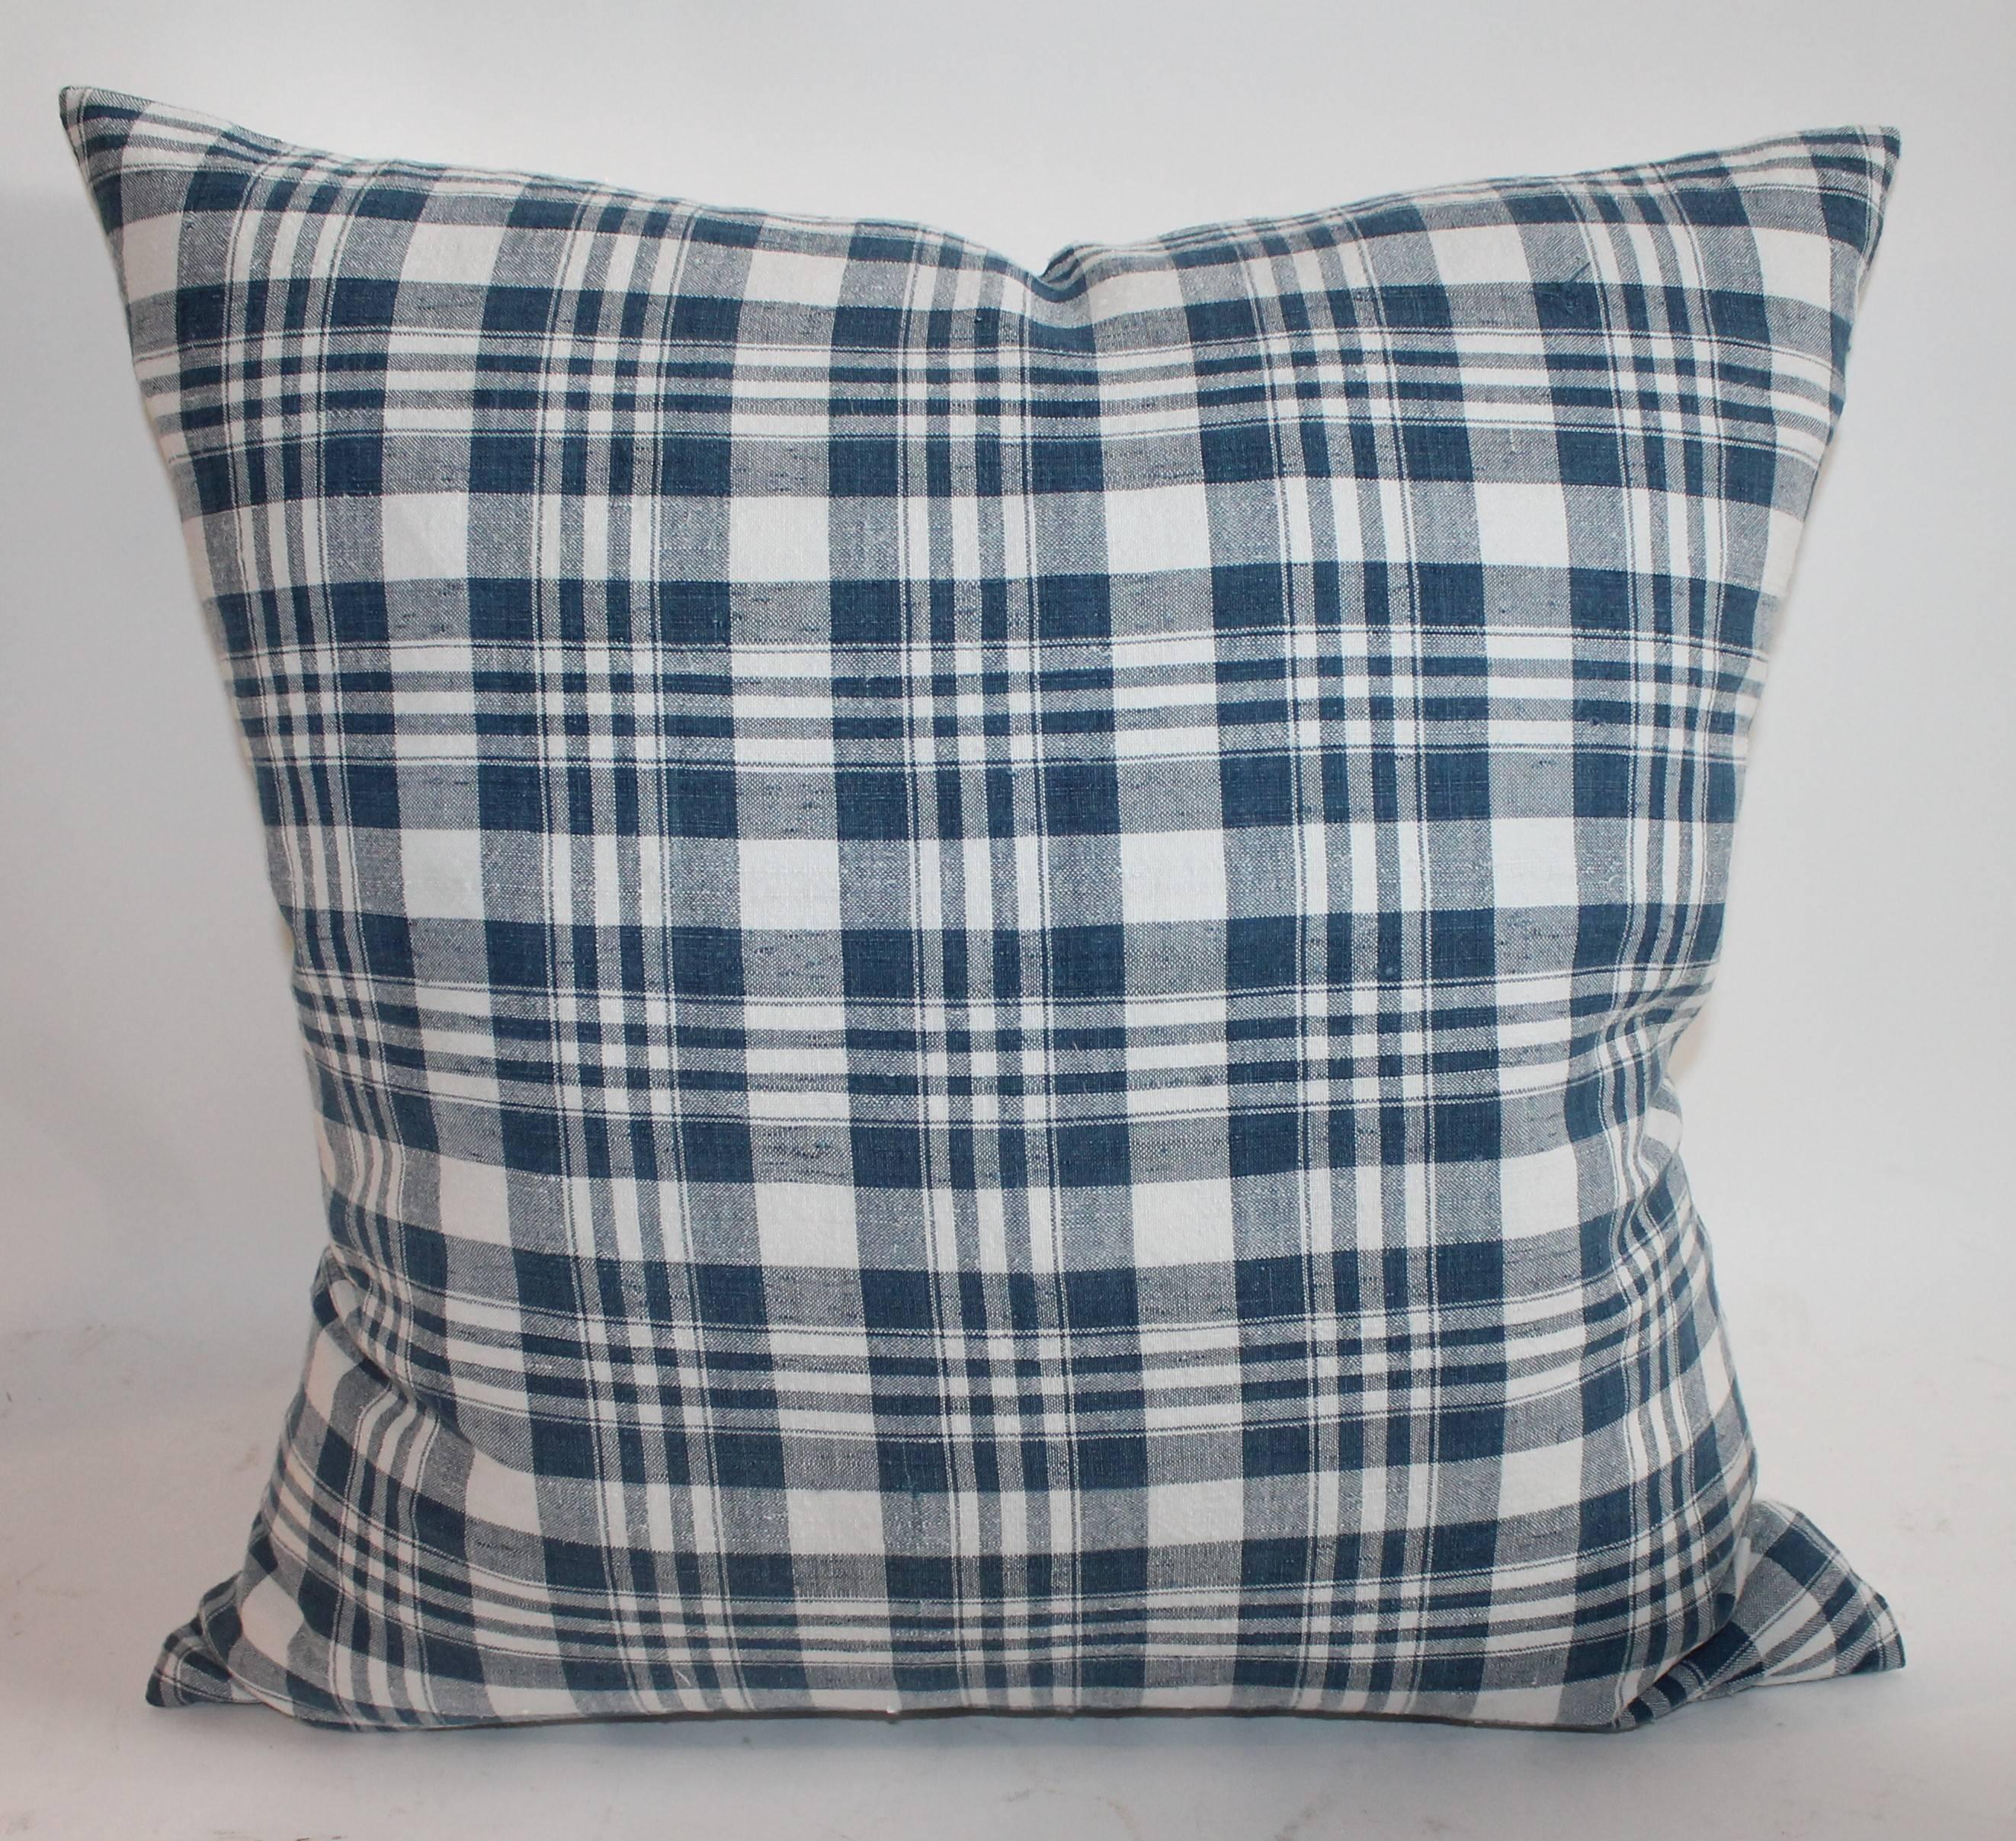 Hand-Crafted 19th Century Blue and White Homespun Linen Pillows For Sale